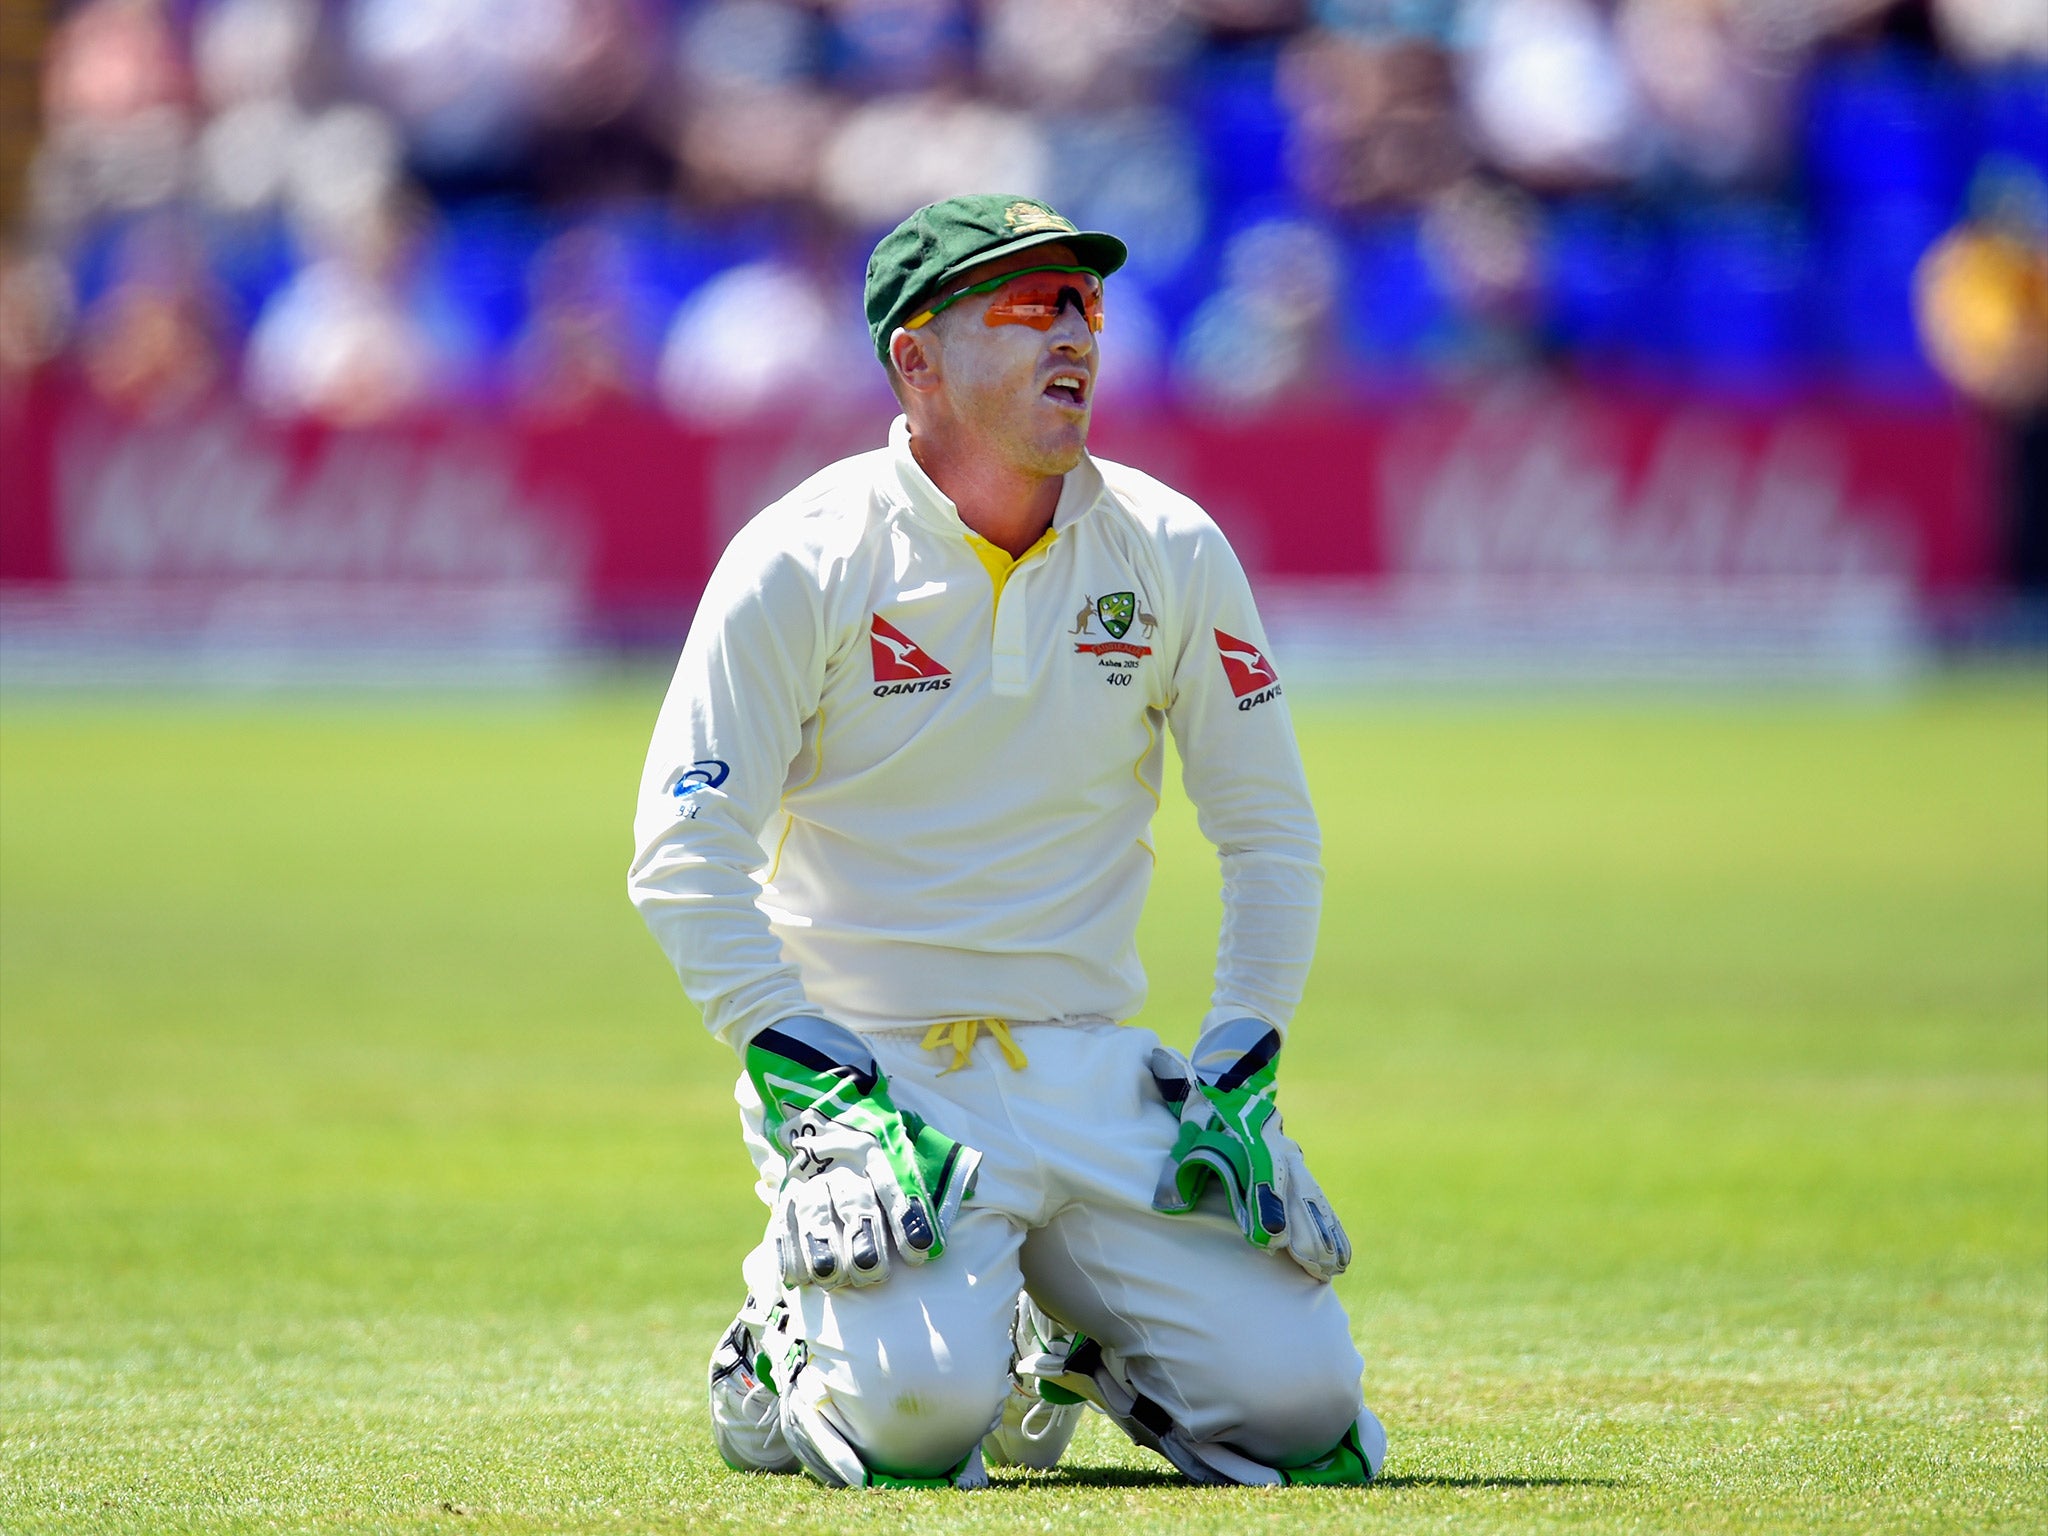 Brad Haddin has pulled out of the Second Test, starting Thursday at Lord’s, for family reasons